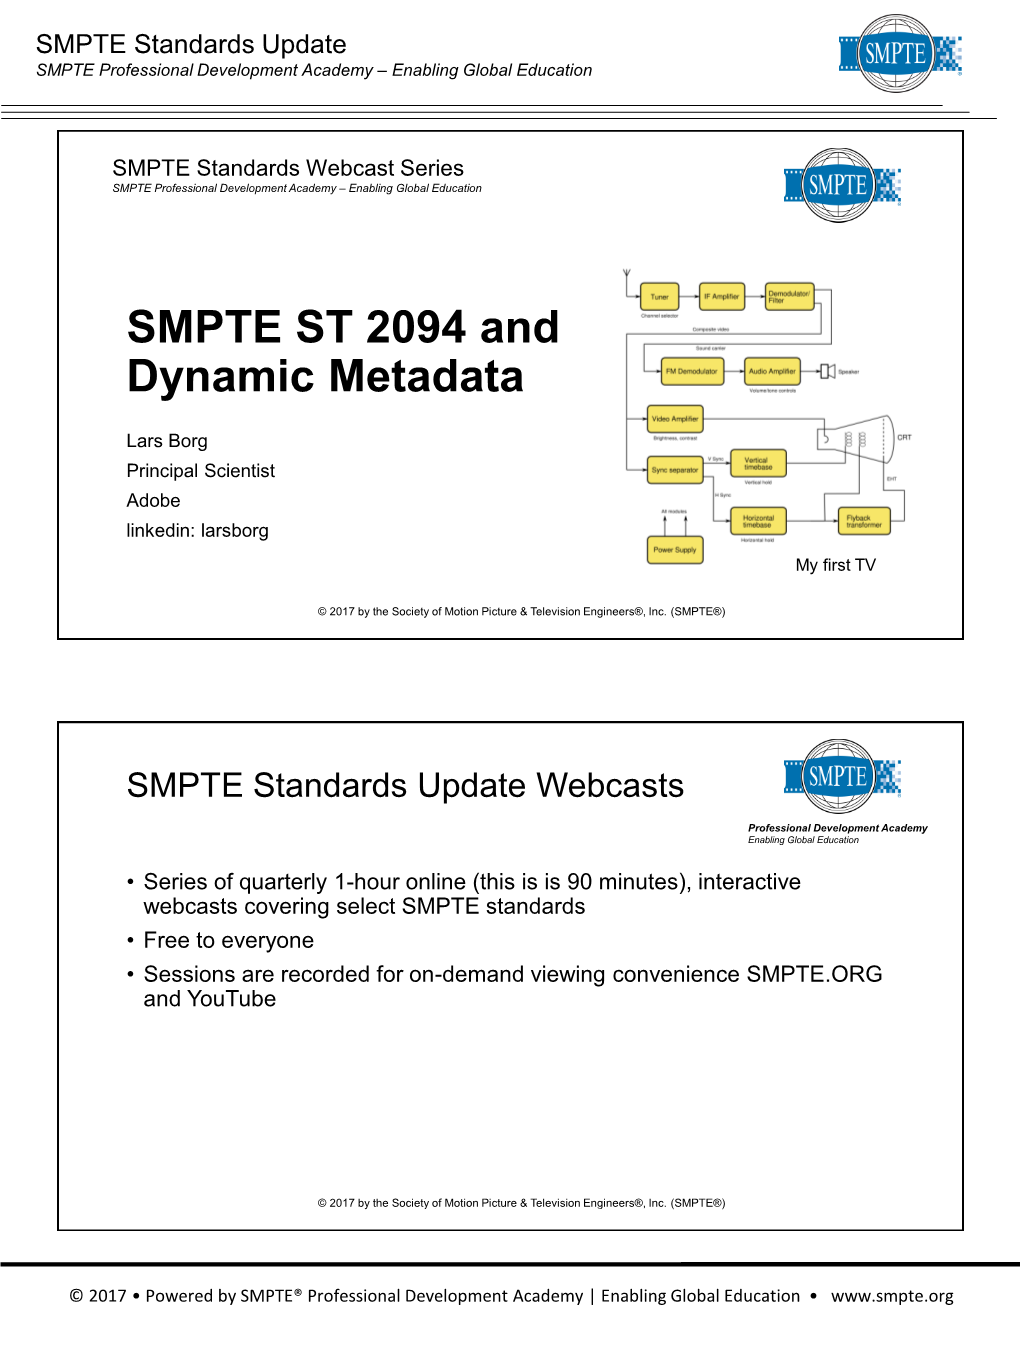 SMPTE ST 2094 and Dynamic Metadata